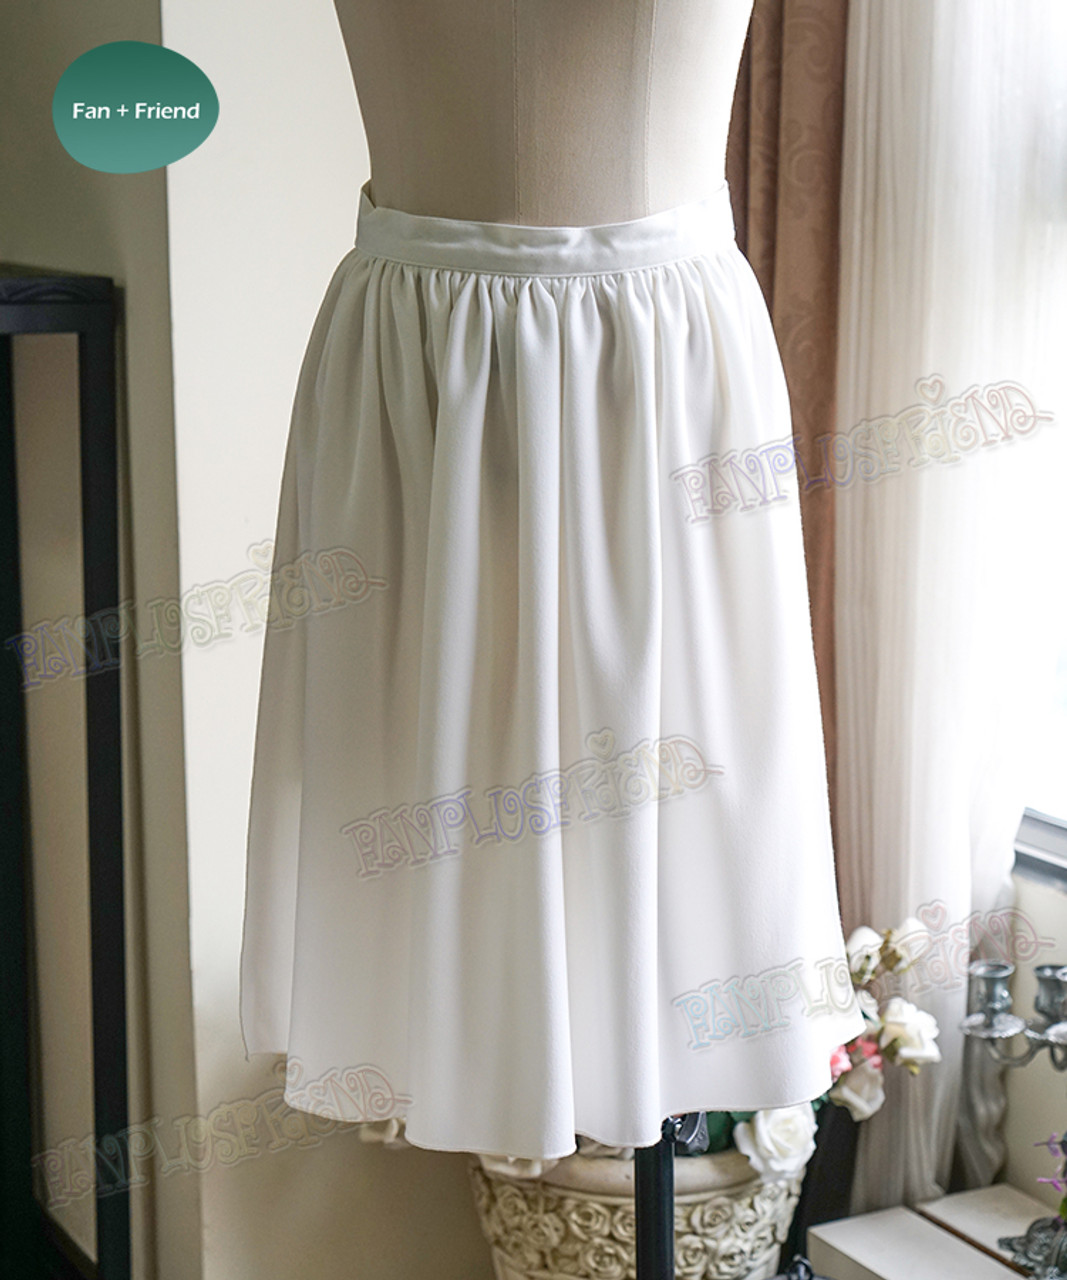  Cos2be Alice Madness Returns And Anime Maid Dress Cosplay  Classic Lolita Fancy Apron Costume : Clothing, Shoes & Jewelry